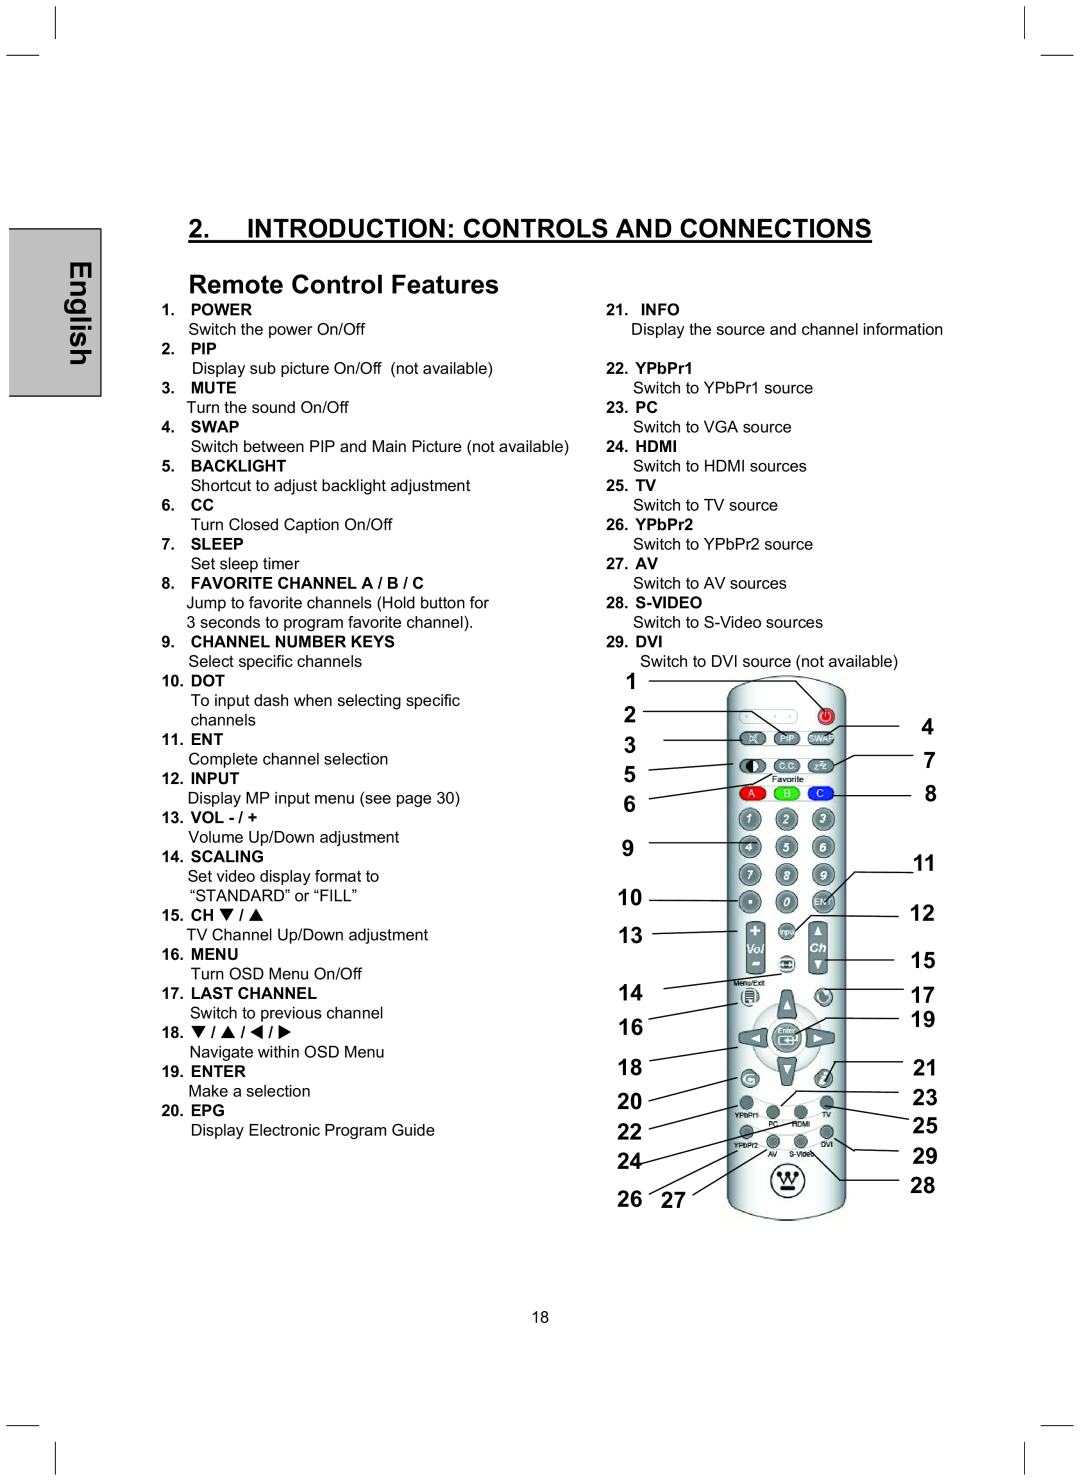 Westinghouse TX-52H480S user manual Introduction Controls And Connections, Remote Control Features, English, 18. T / S / W 